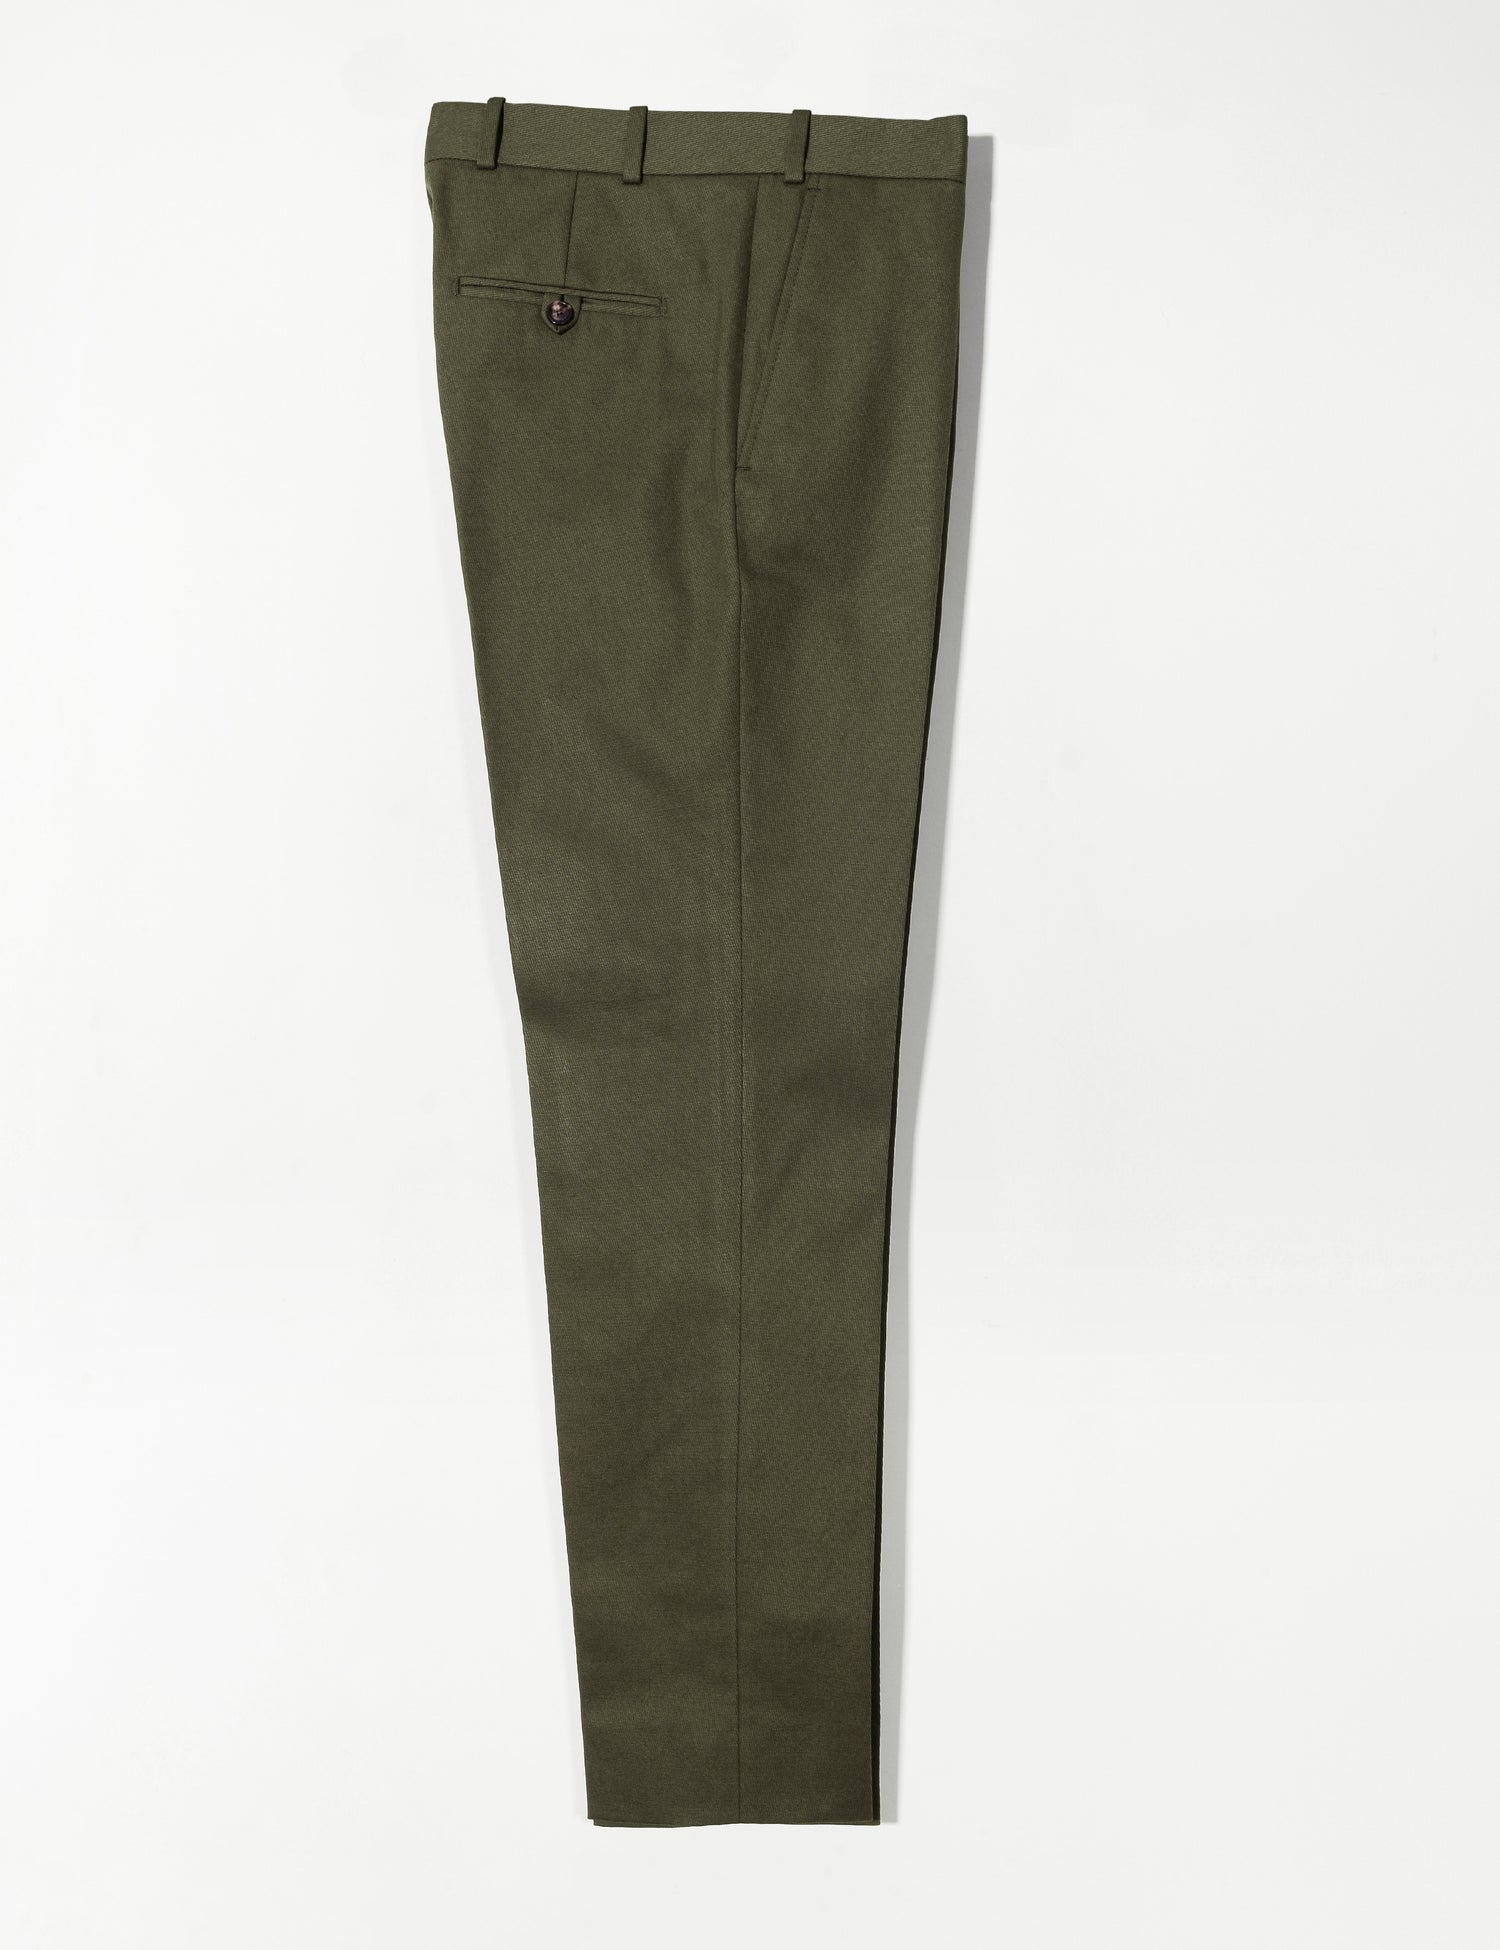 Brooklyn Tailors BKT50 Tailored Trousers in Cavalry Twill - Olive full length flat shot